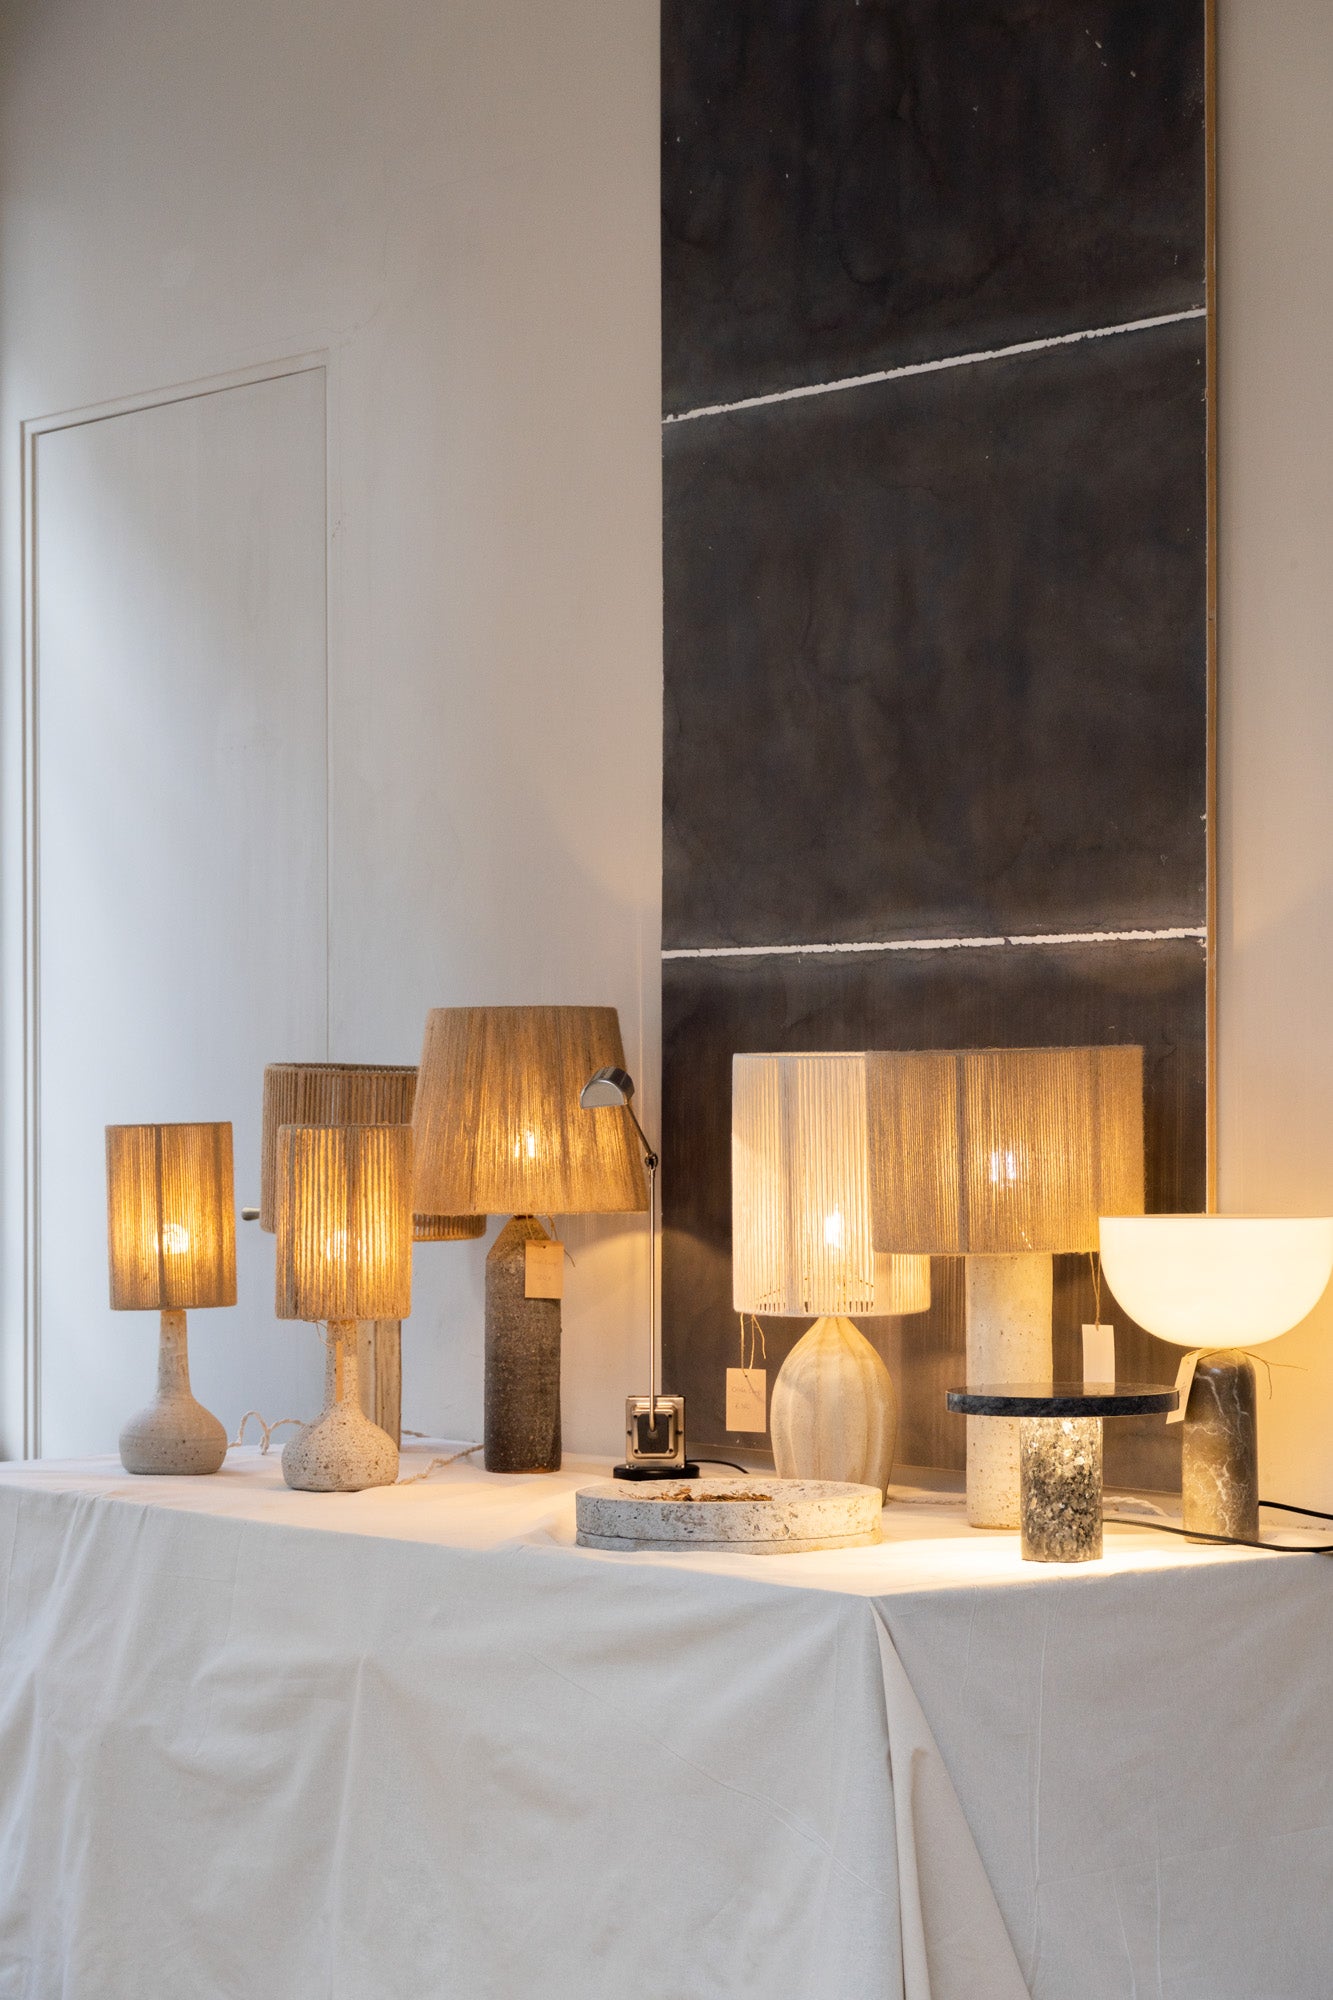 French handmade ceramic lamps in neutral interior